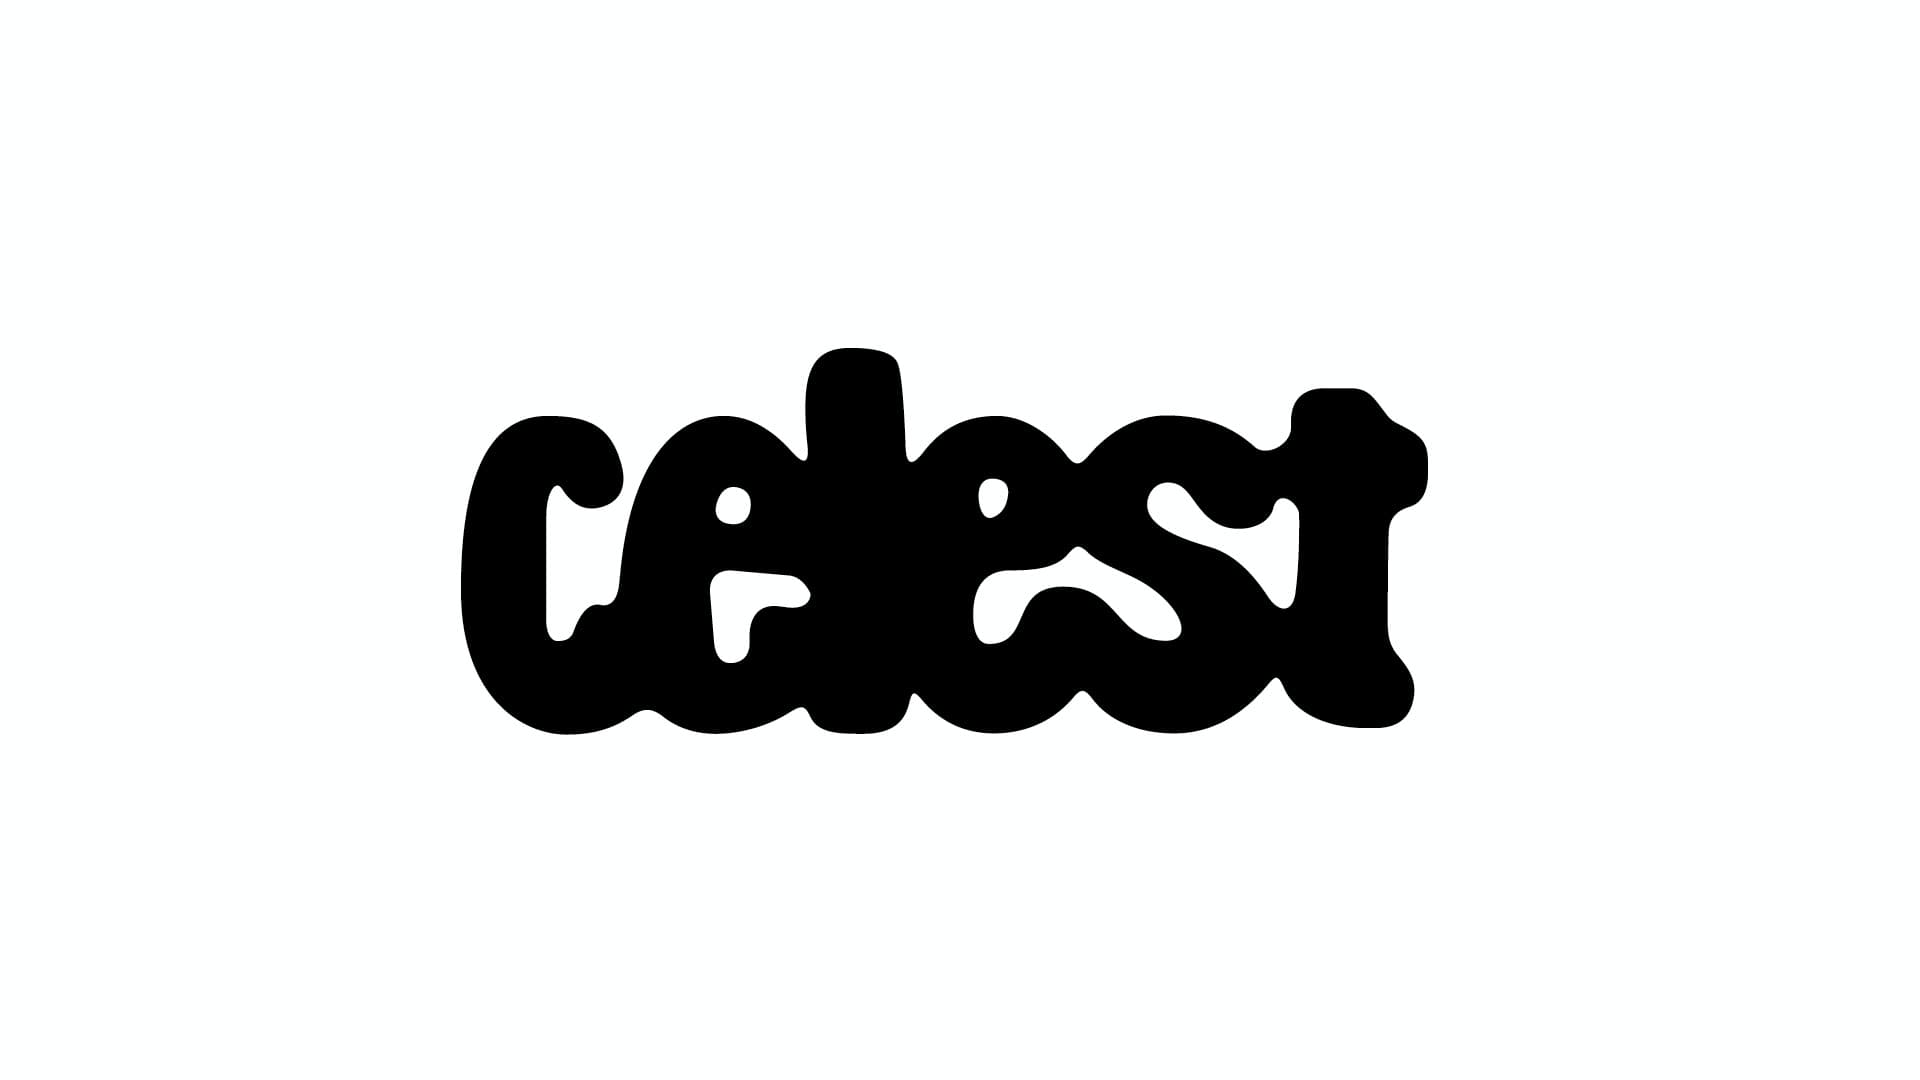 The logo of Celest Skateboards is the result of a blend of inspiration and typographic design work